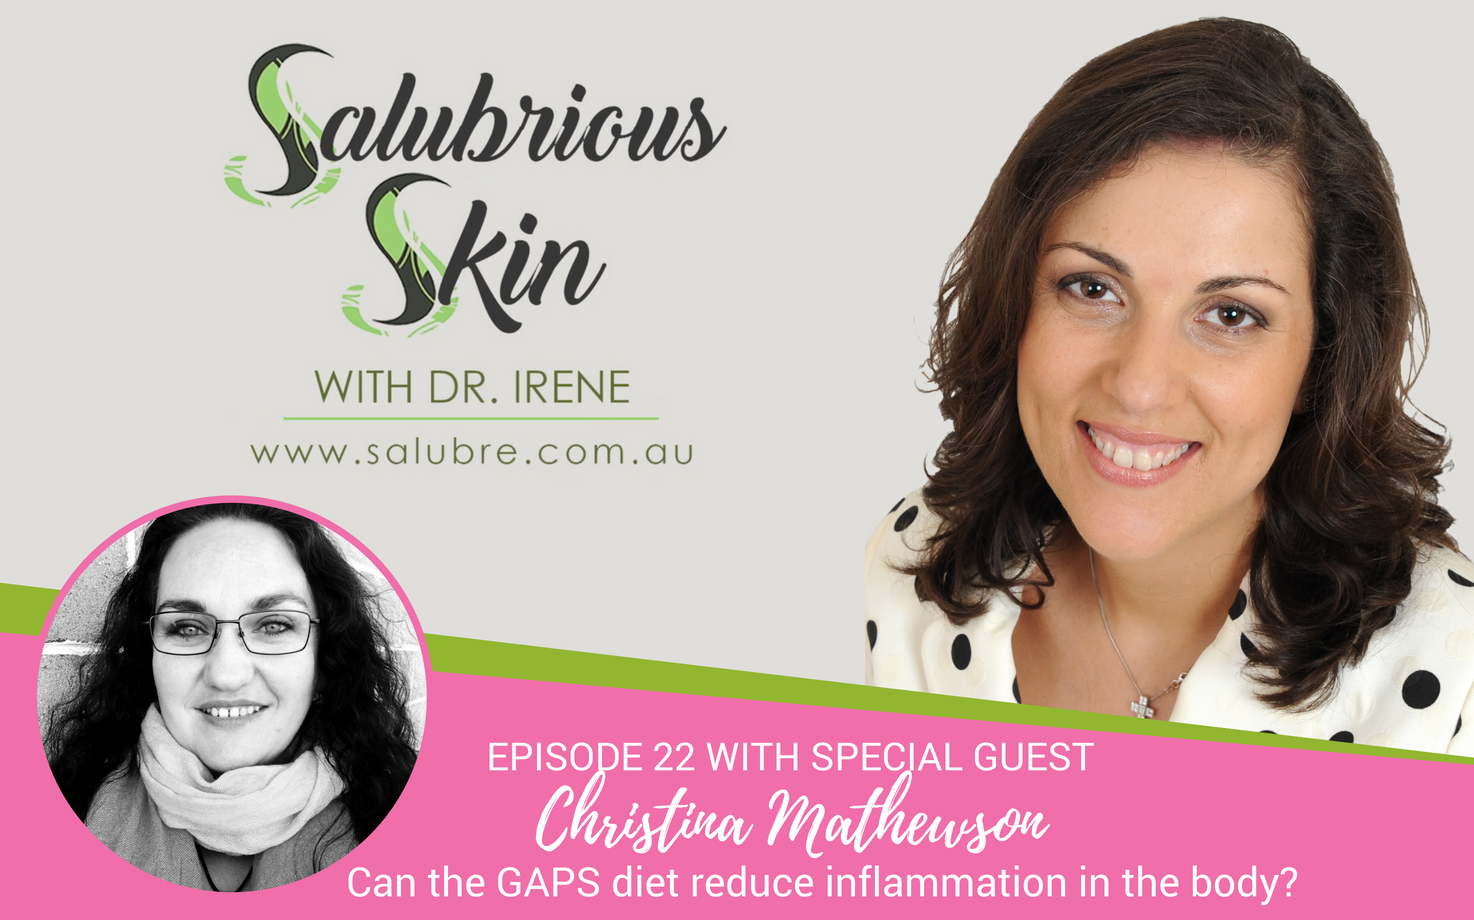 Episode 22: Can the GAPS diet reduce inflammation in the body?